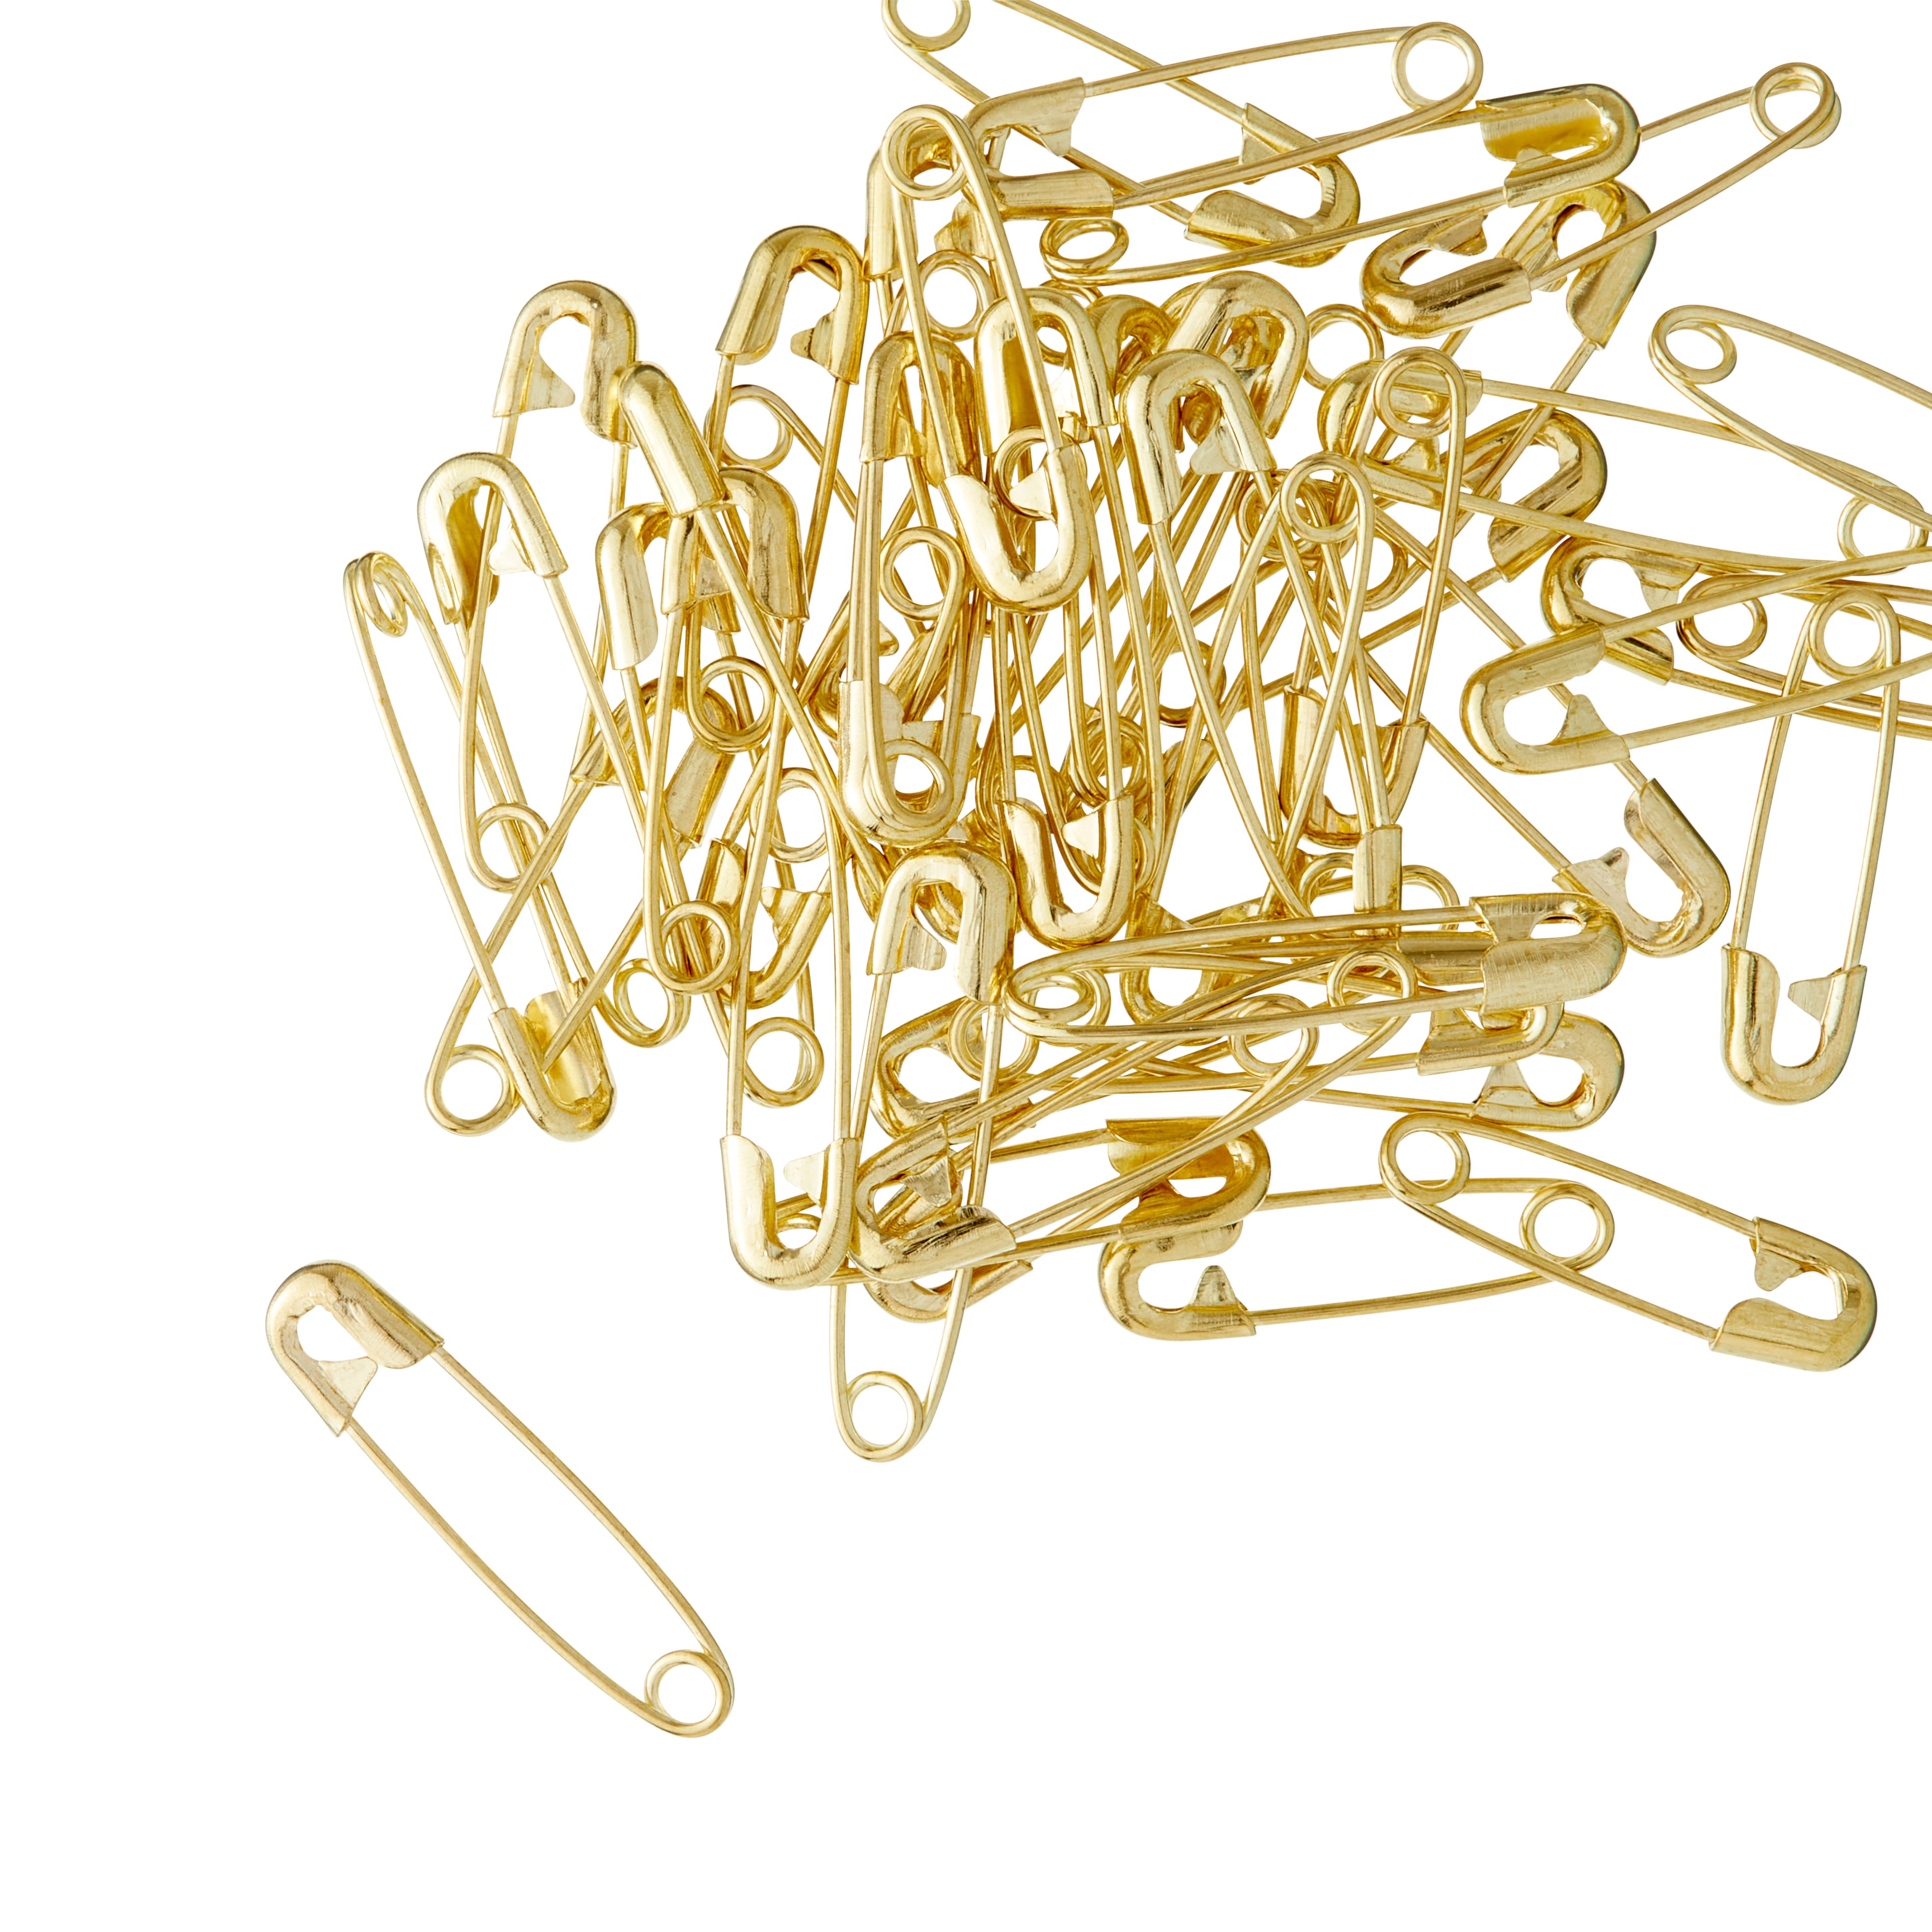 LOOPS & THREADS- SAFETY PINS- ASSORTED SIZES- SILVER & GOLD COMBO- 3 PACKS